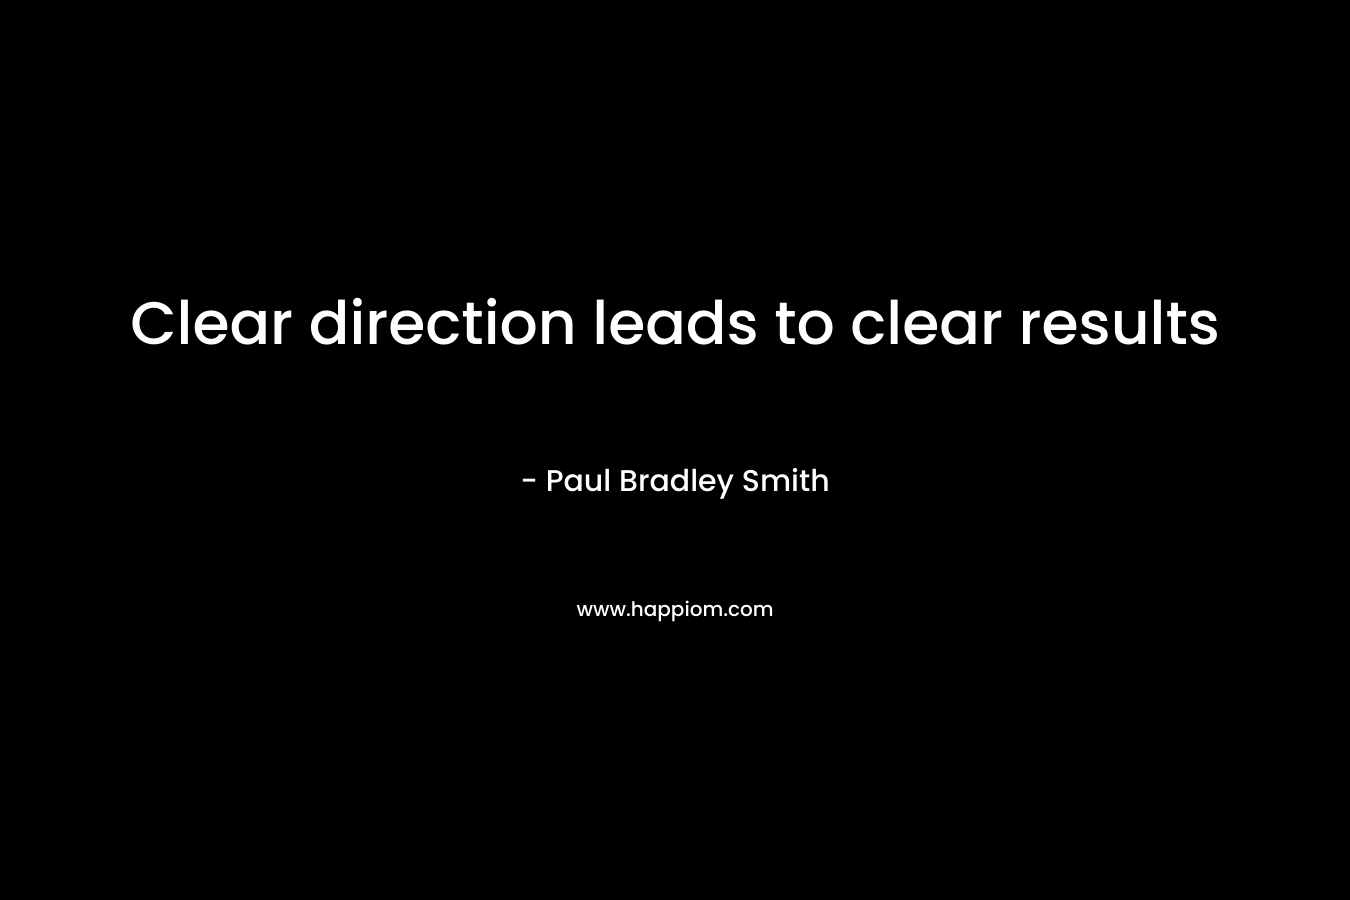 Clear direction leads to clear results